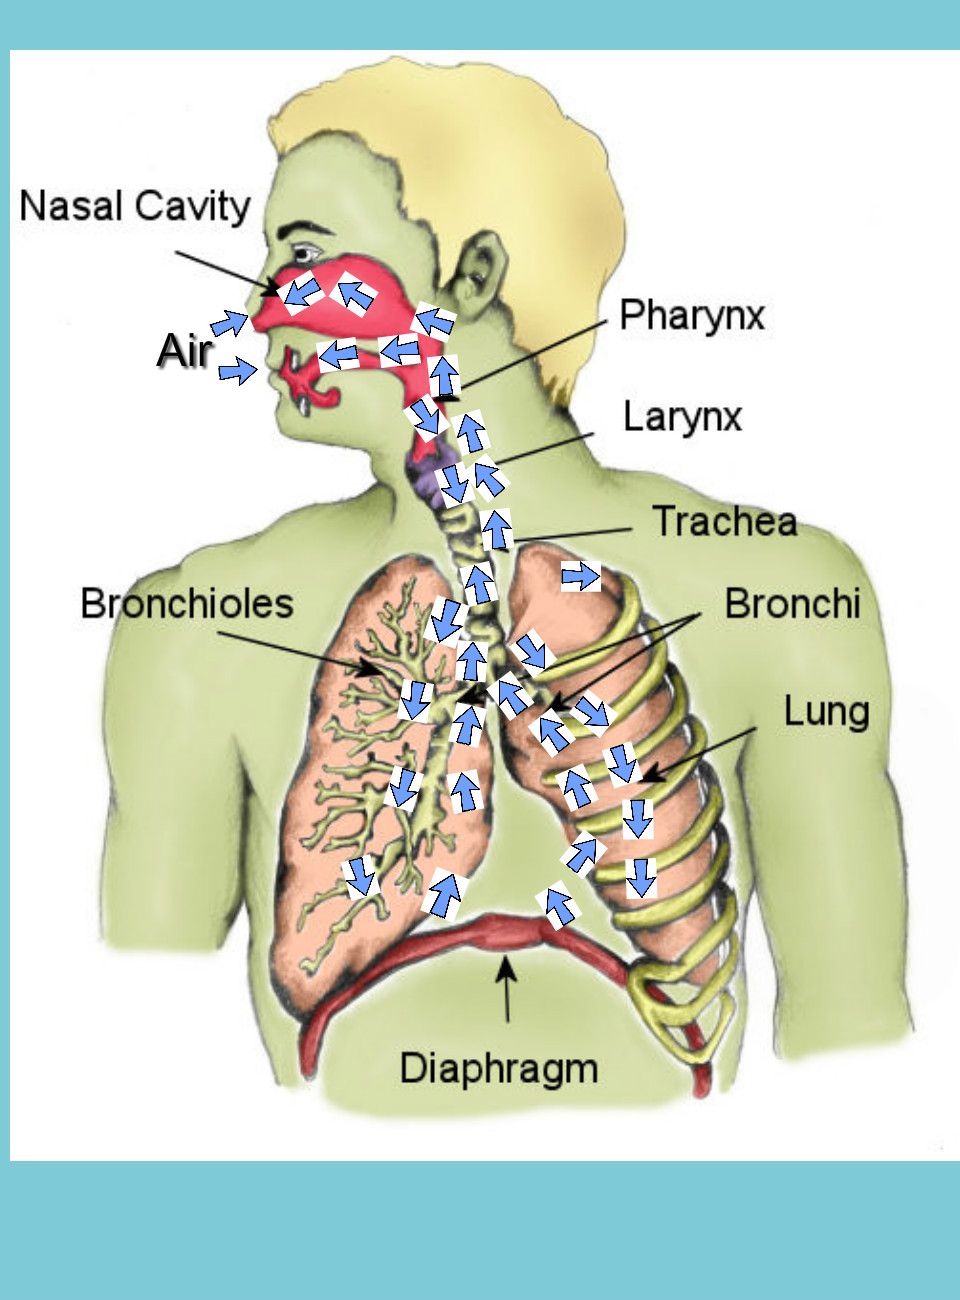 Free Respiration Cliparts, Download Free Clip Art, Free ... simple diagram of lungs 